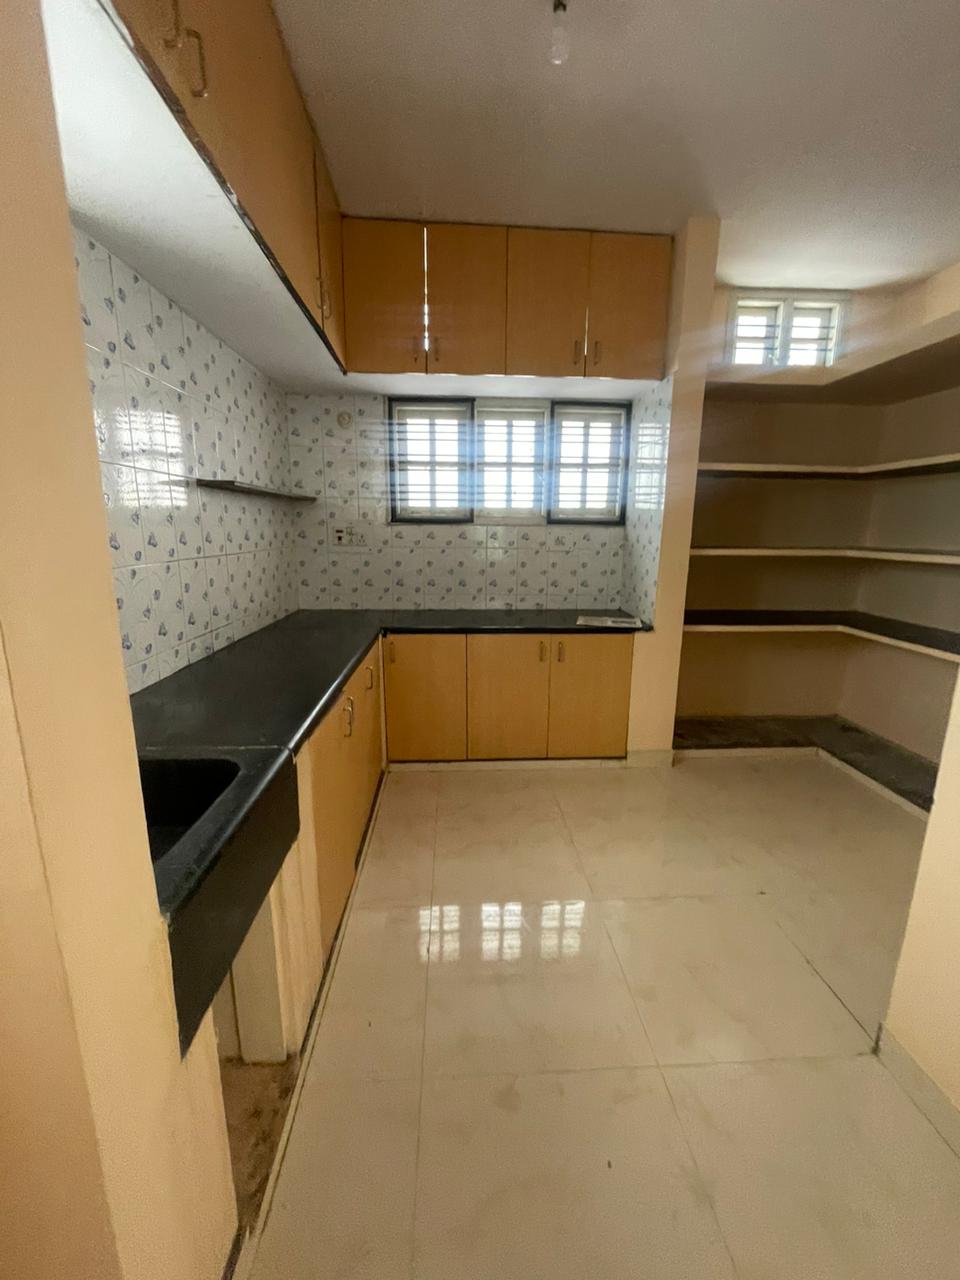 1 BHK Independent House for Lease Only at JAML2 - 4667 - 15 Lakhs in Ganakal